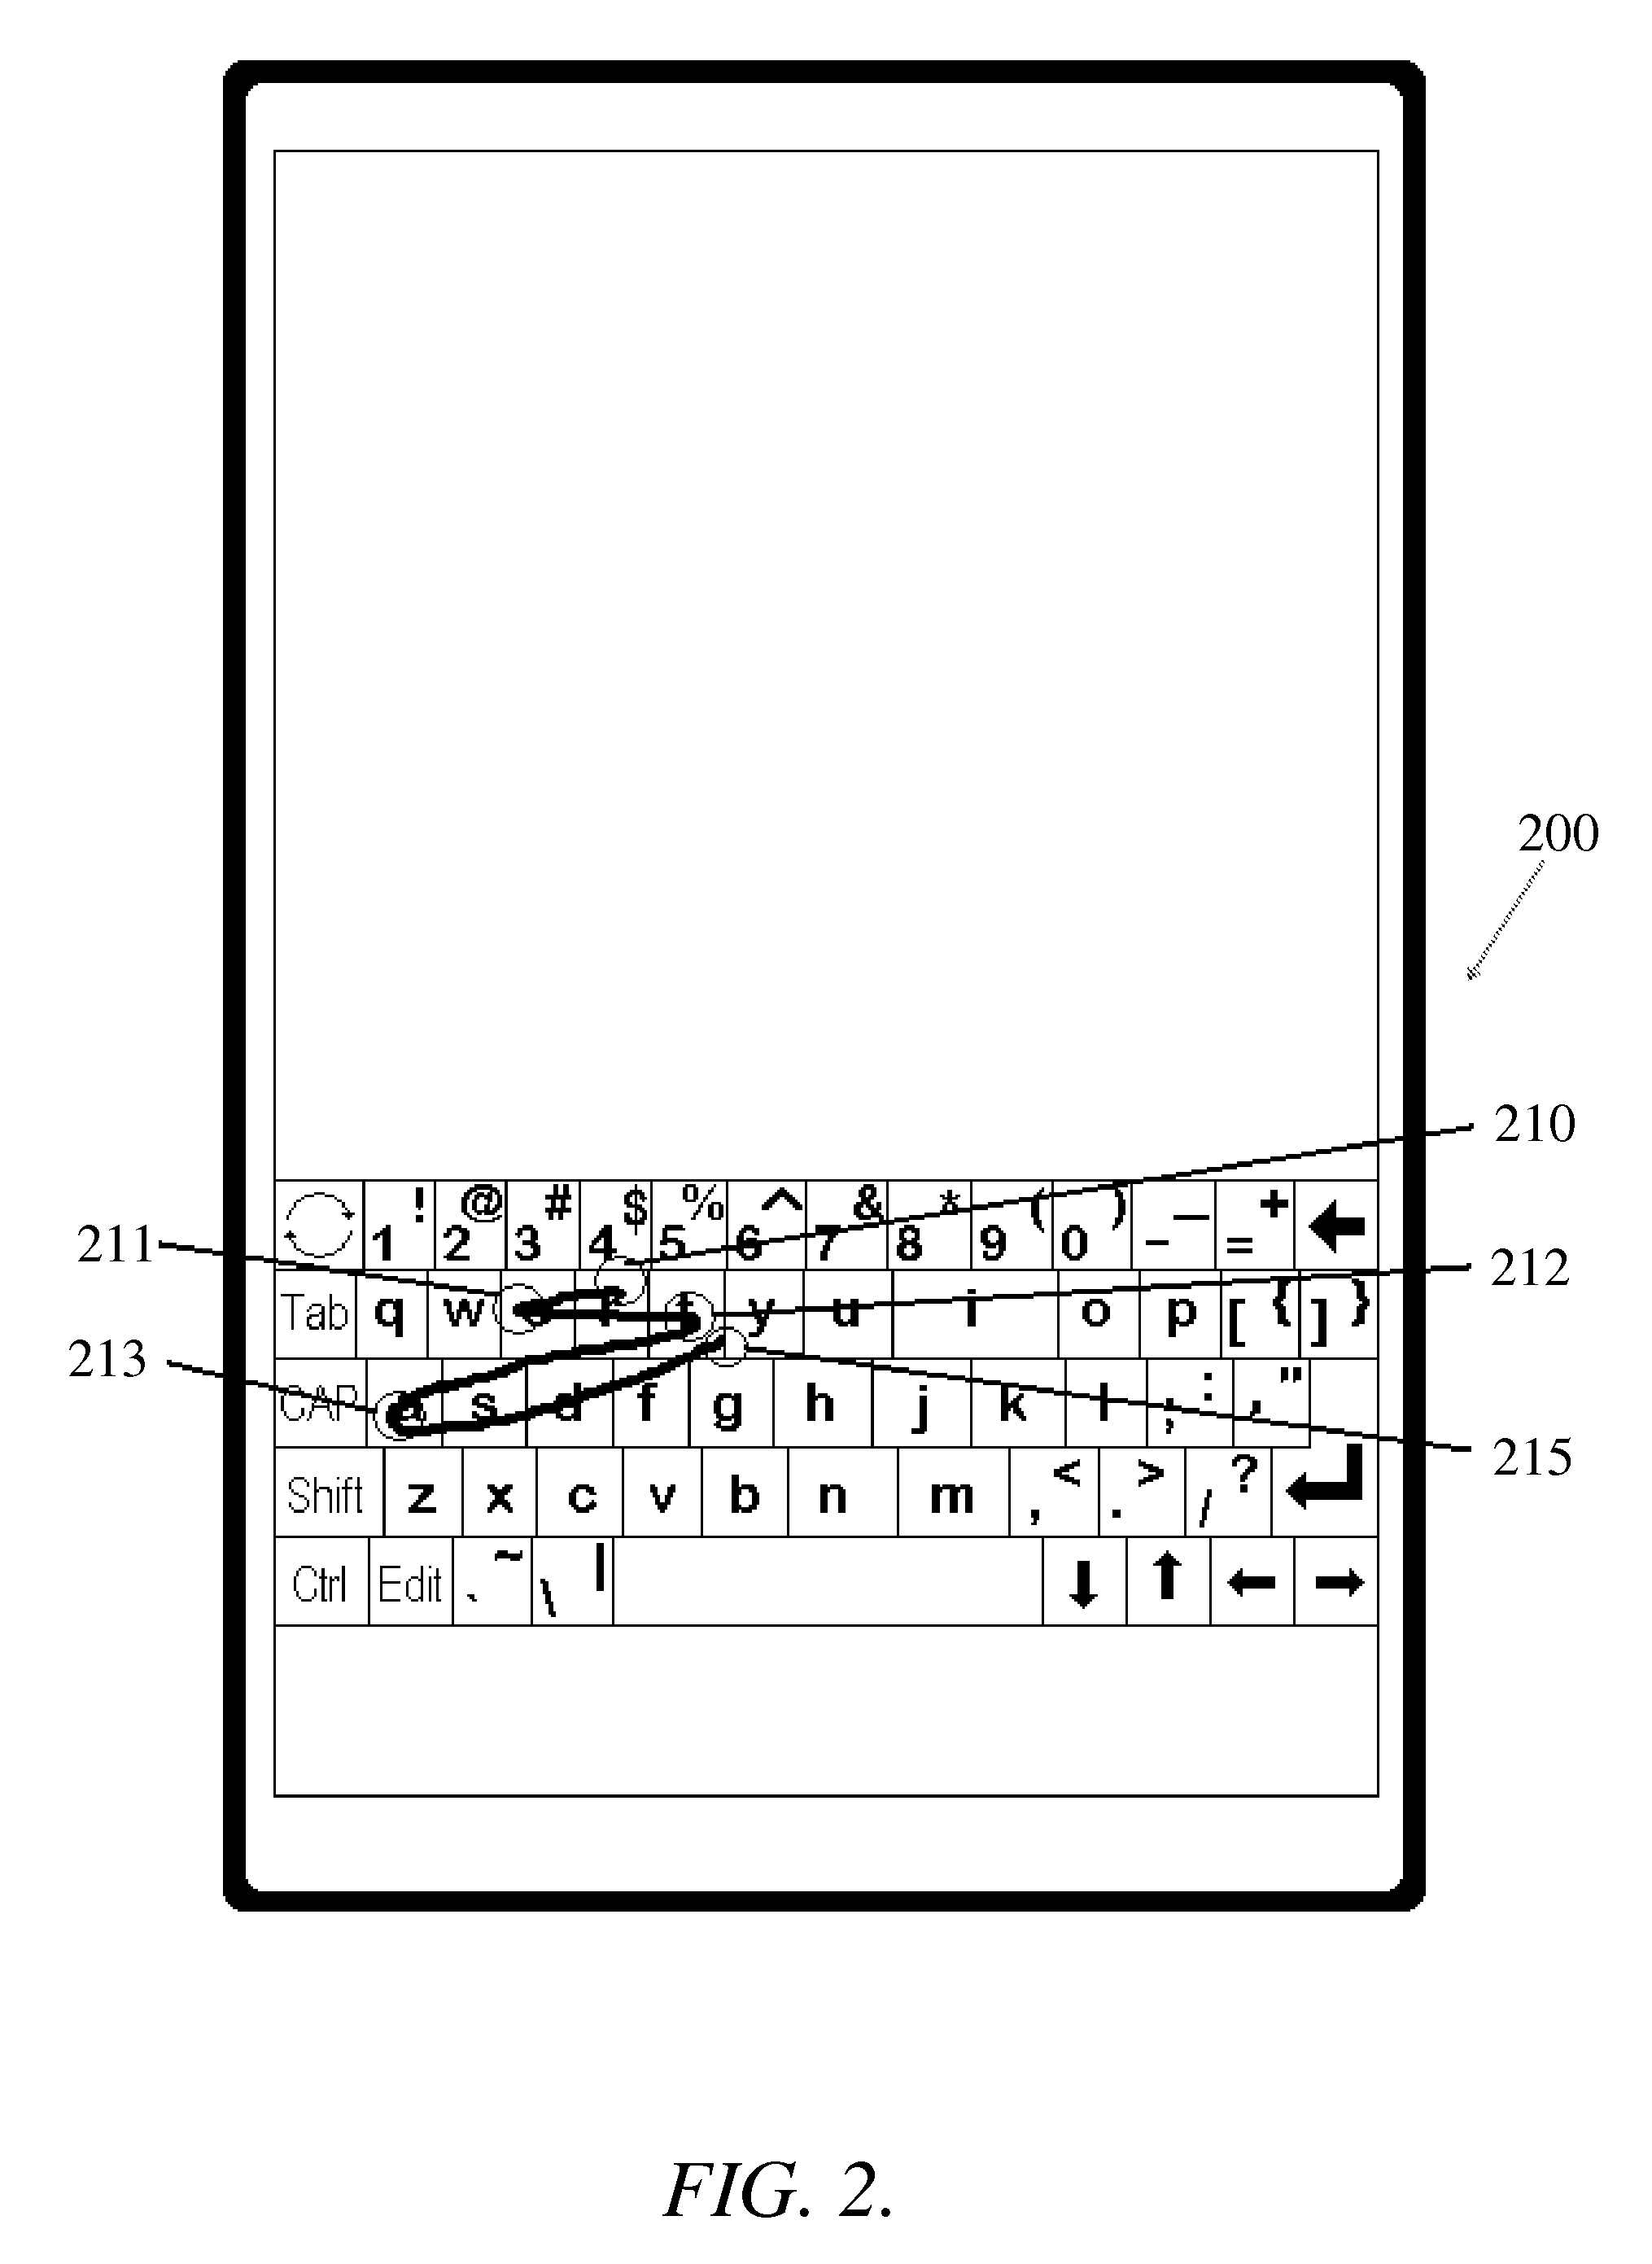 Gesture-based repetition of key activations on a virtual keyboard